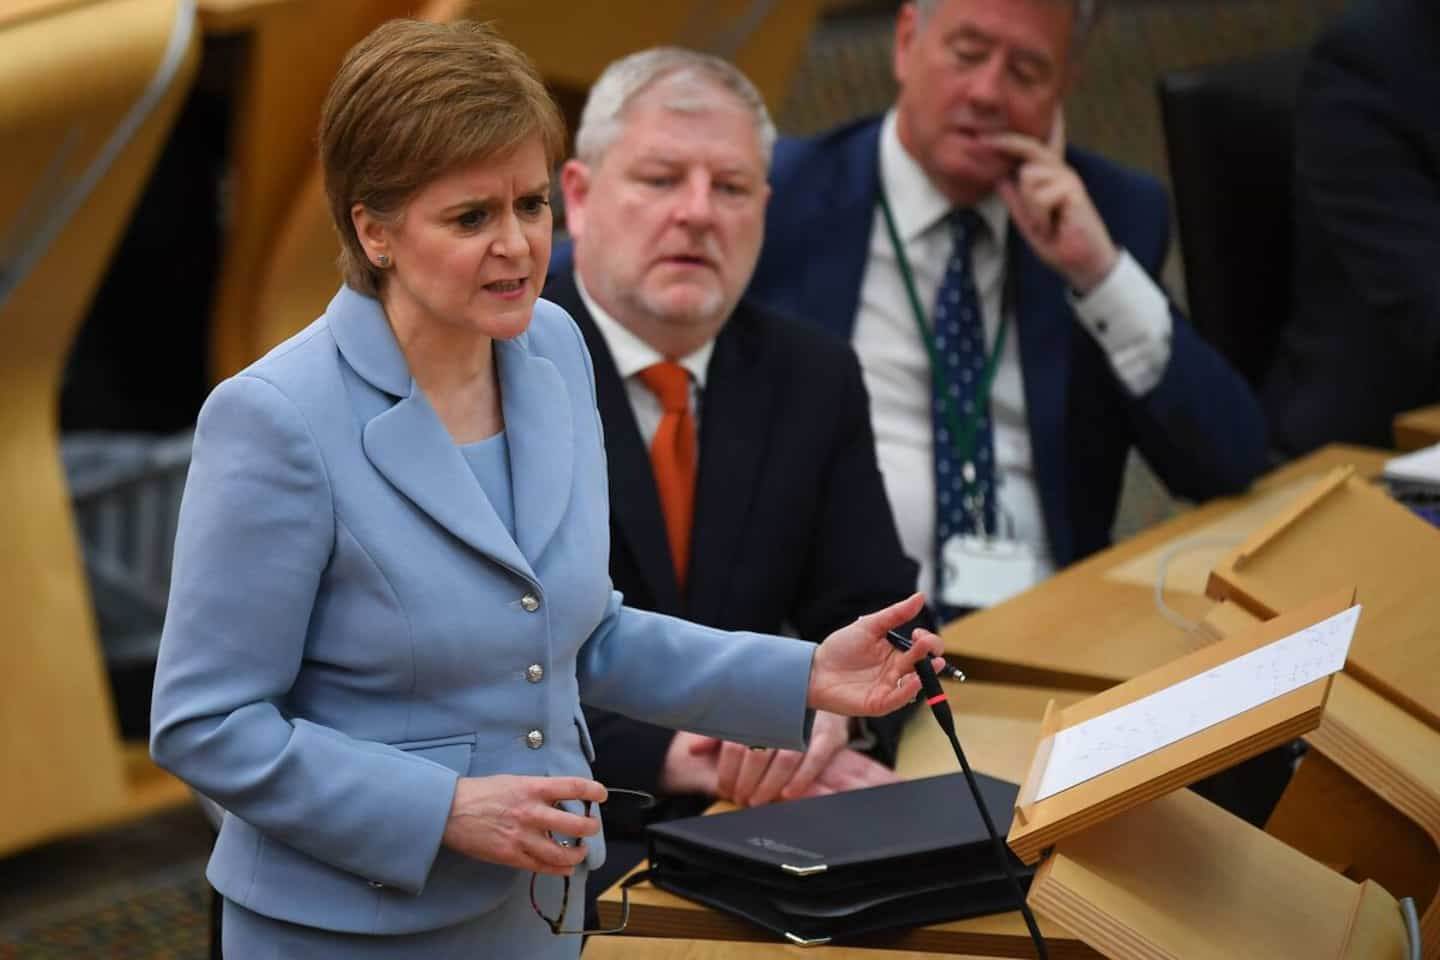 Scottish government aims for independence referendum in 2023